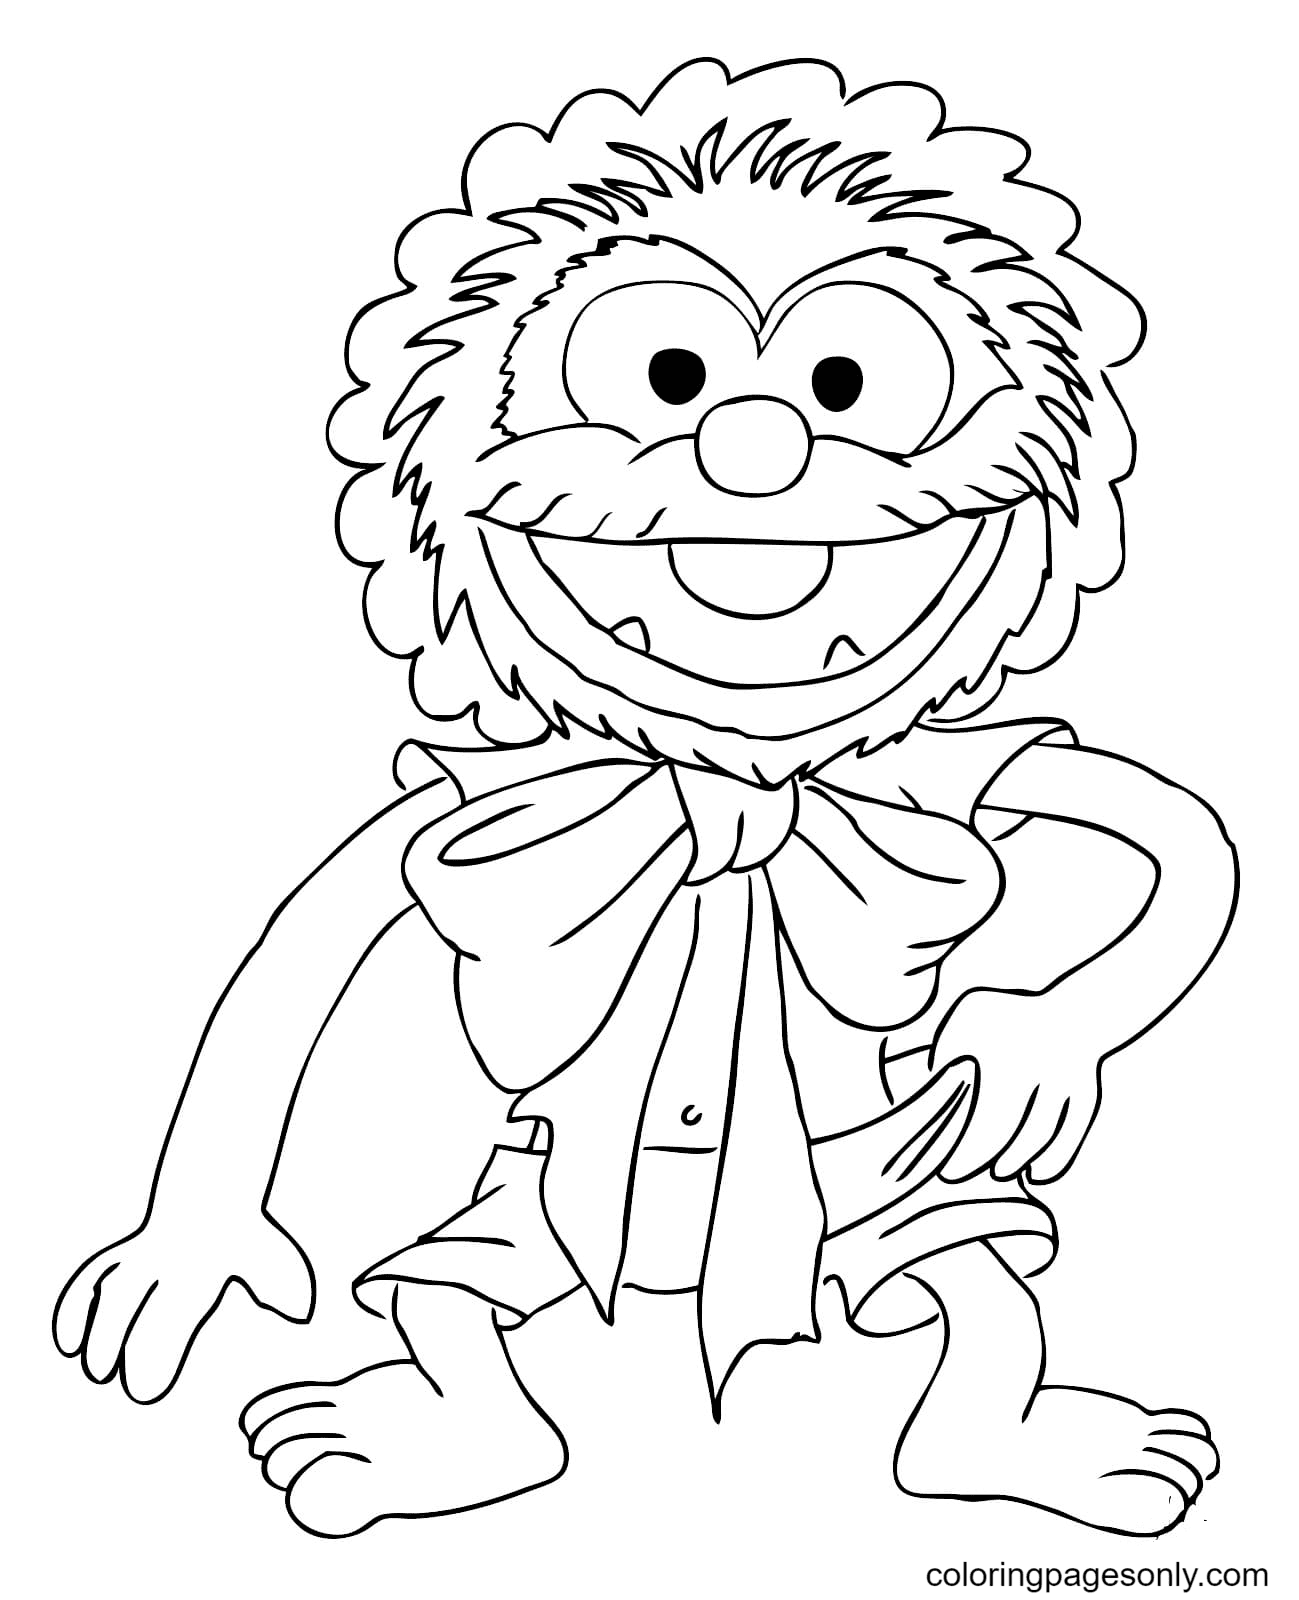 Baby Animal Coloring Page